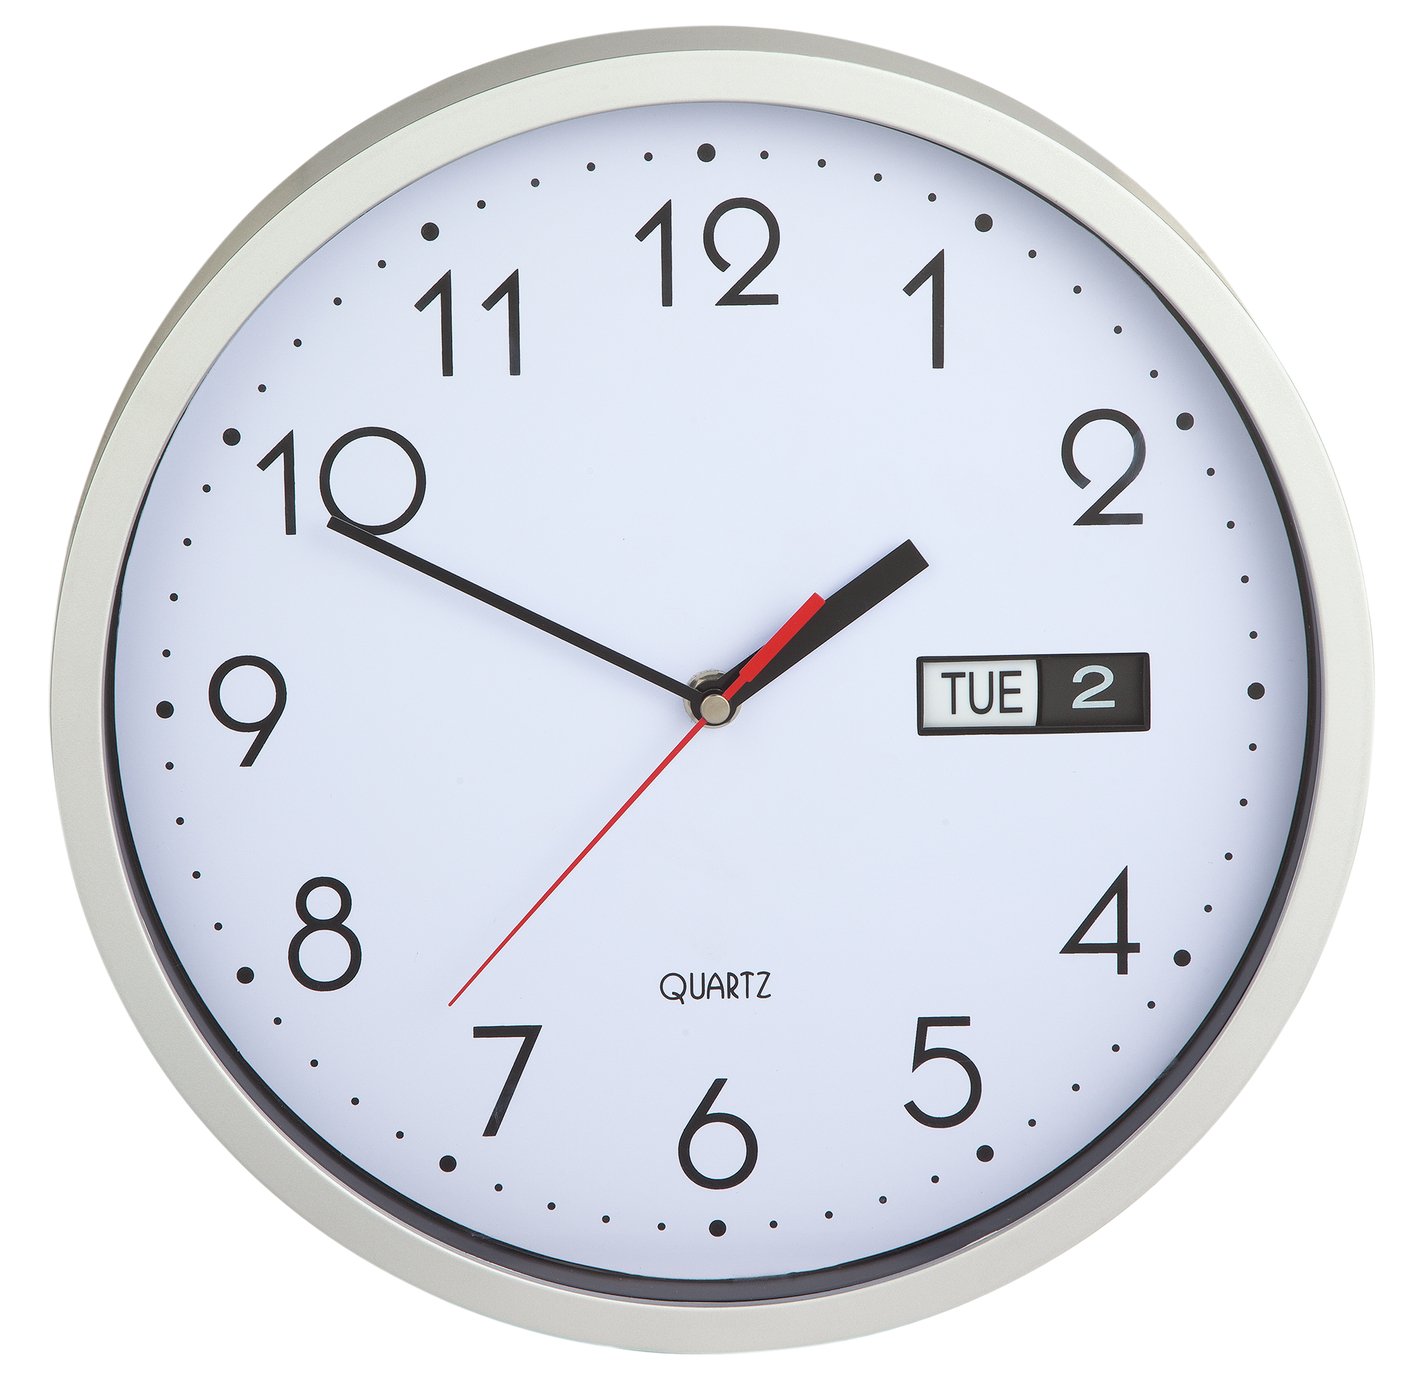 Argos Home Day and Date Wall Clock Review